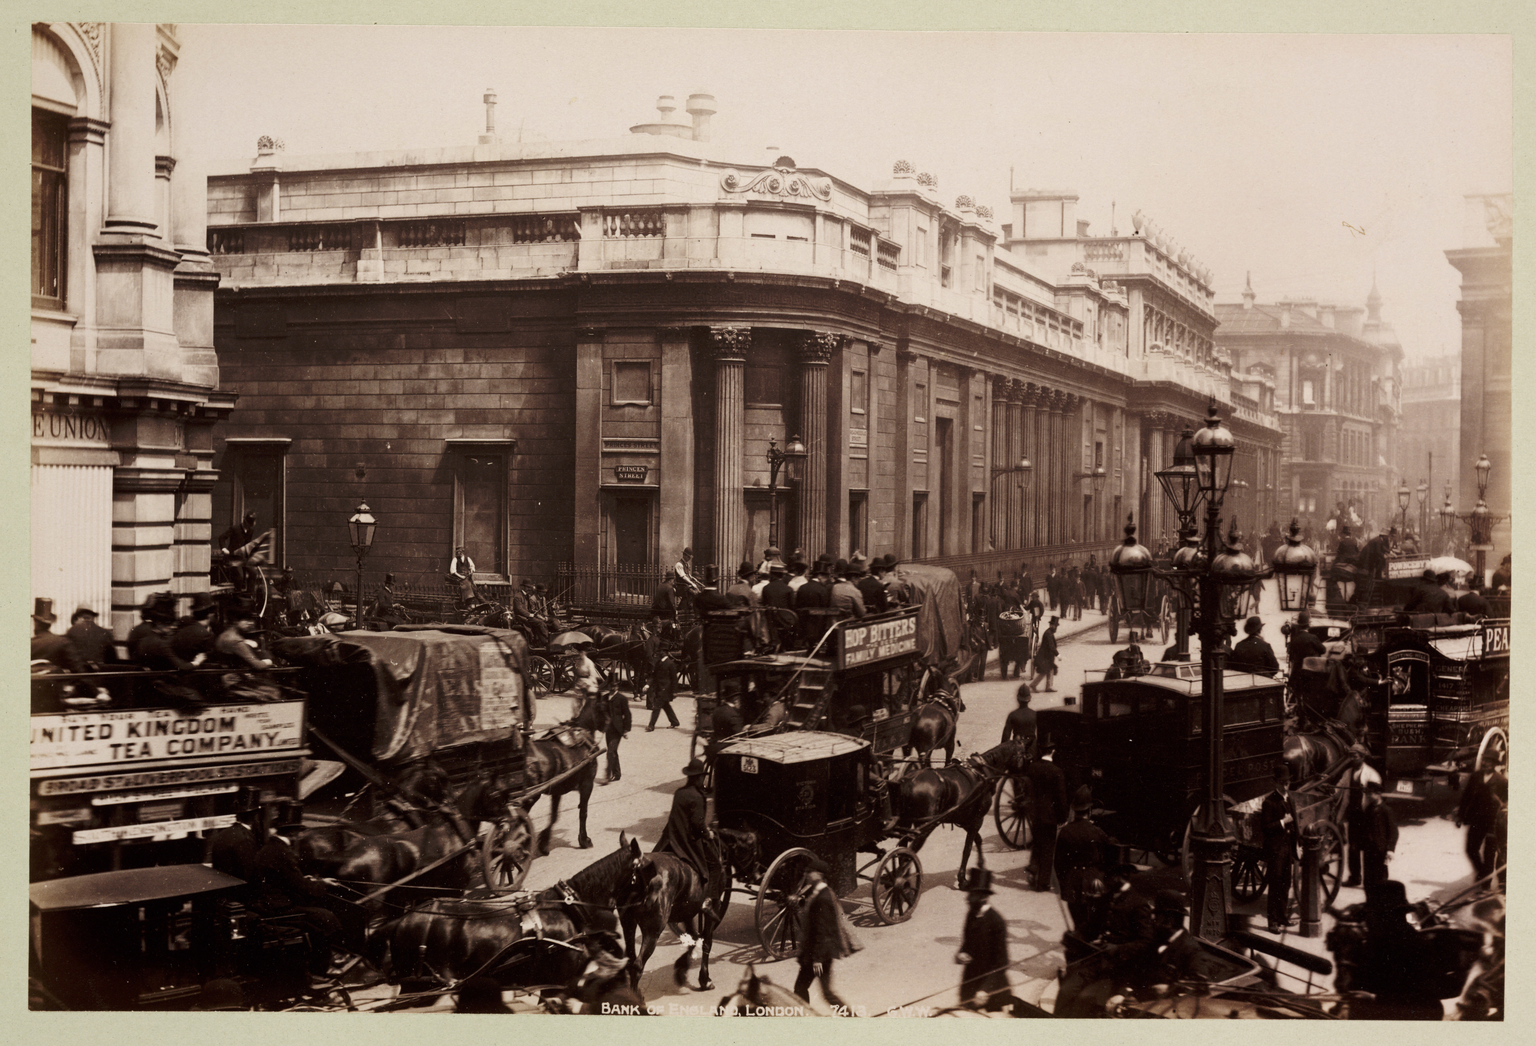 A photograph of the Bank of England building published by George Washington Wilson around 1890. 